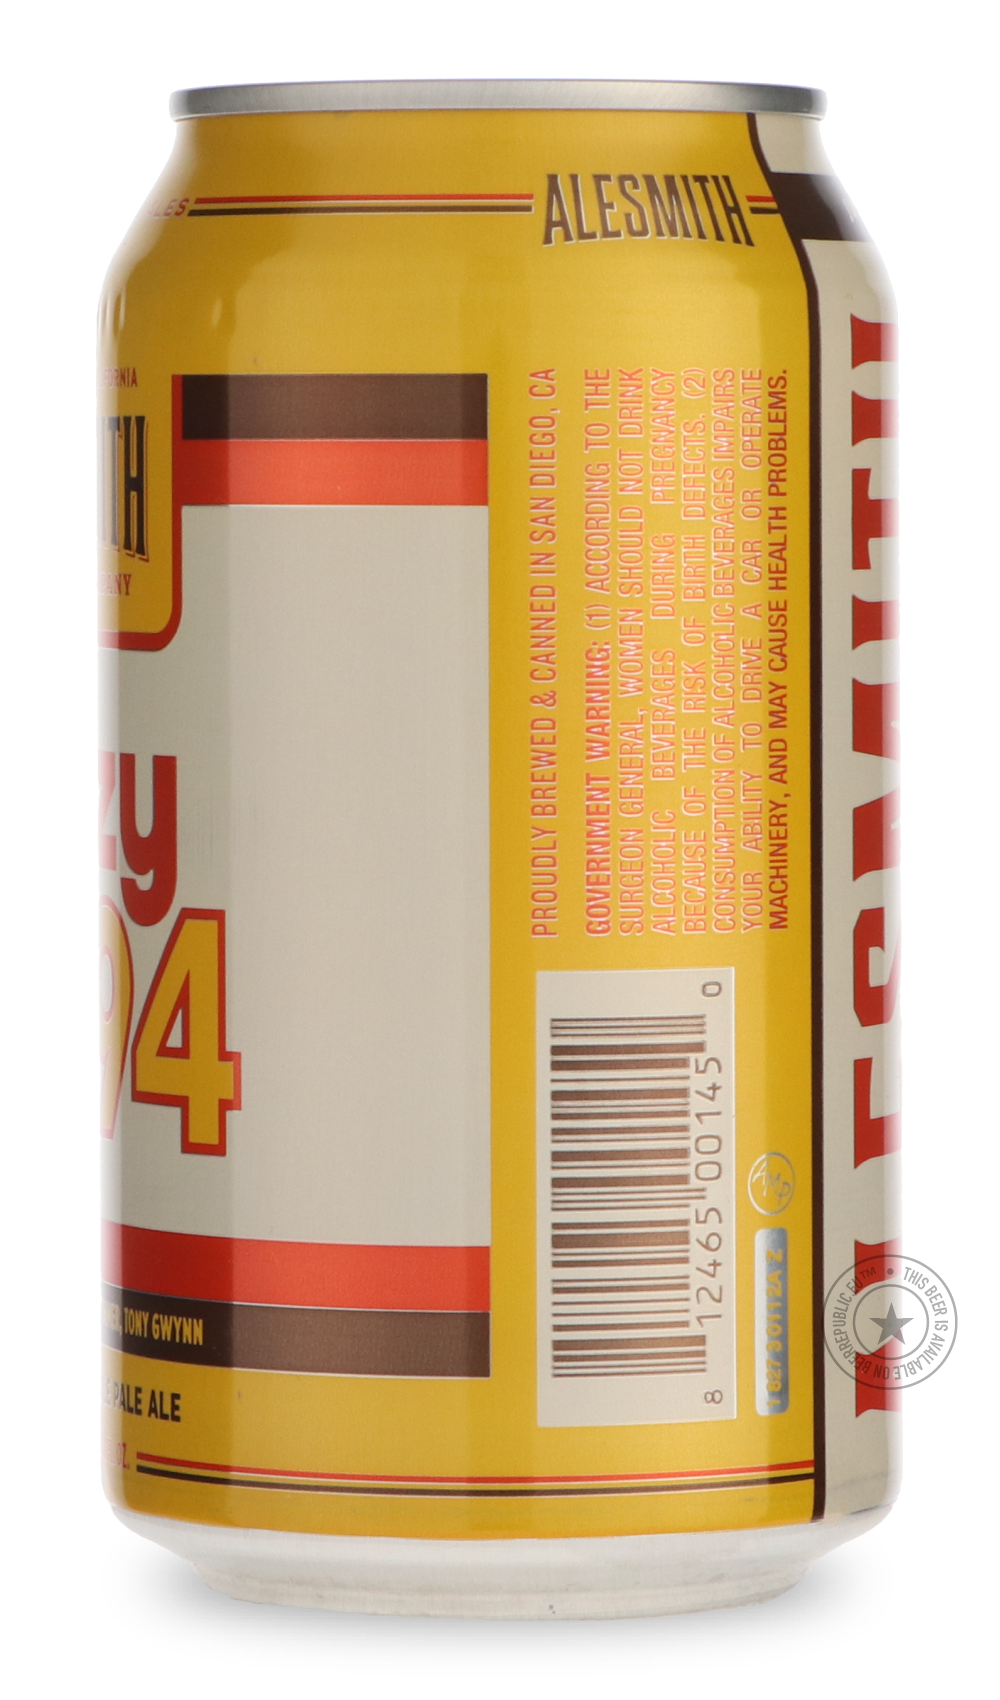 -AleSmith- Hazy .394-Pale- Only @ Beer Republic - The best online beer store for American & Canadian craft beer - Buy beer online from the USA and Canada - Bier online kopen - Amerikaans bier kopen - Craft beer store - Craft beer kopen - Amerikanisch bier kaufen - Bier online kaufen - Acheter biere online - IPA - Stout - Porter - New England IPA - Hazy IPA - Imperial Stout - Barrel Aged - Barrel Aged Imperial Stout - Brown - Dark beer - Blond - Blonde - Pilsner - Lager - Wheat - Weizen - Amber - Barley Wine